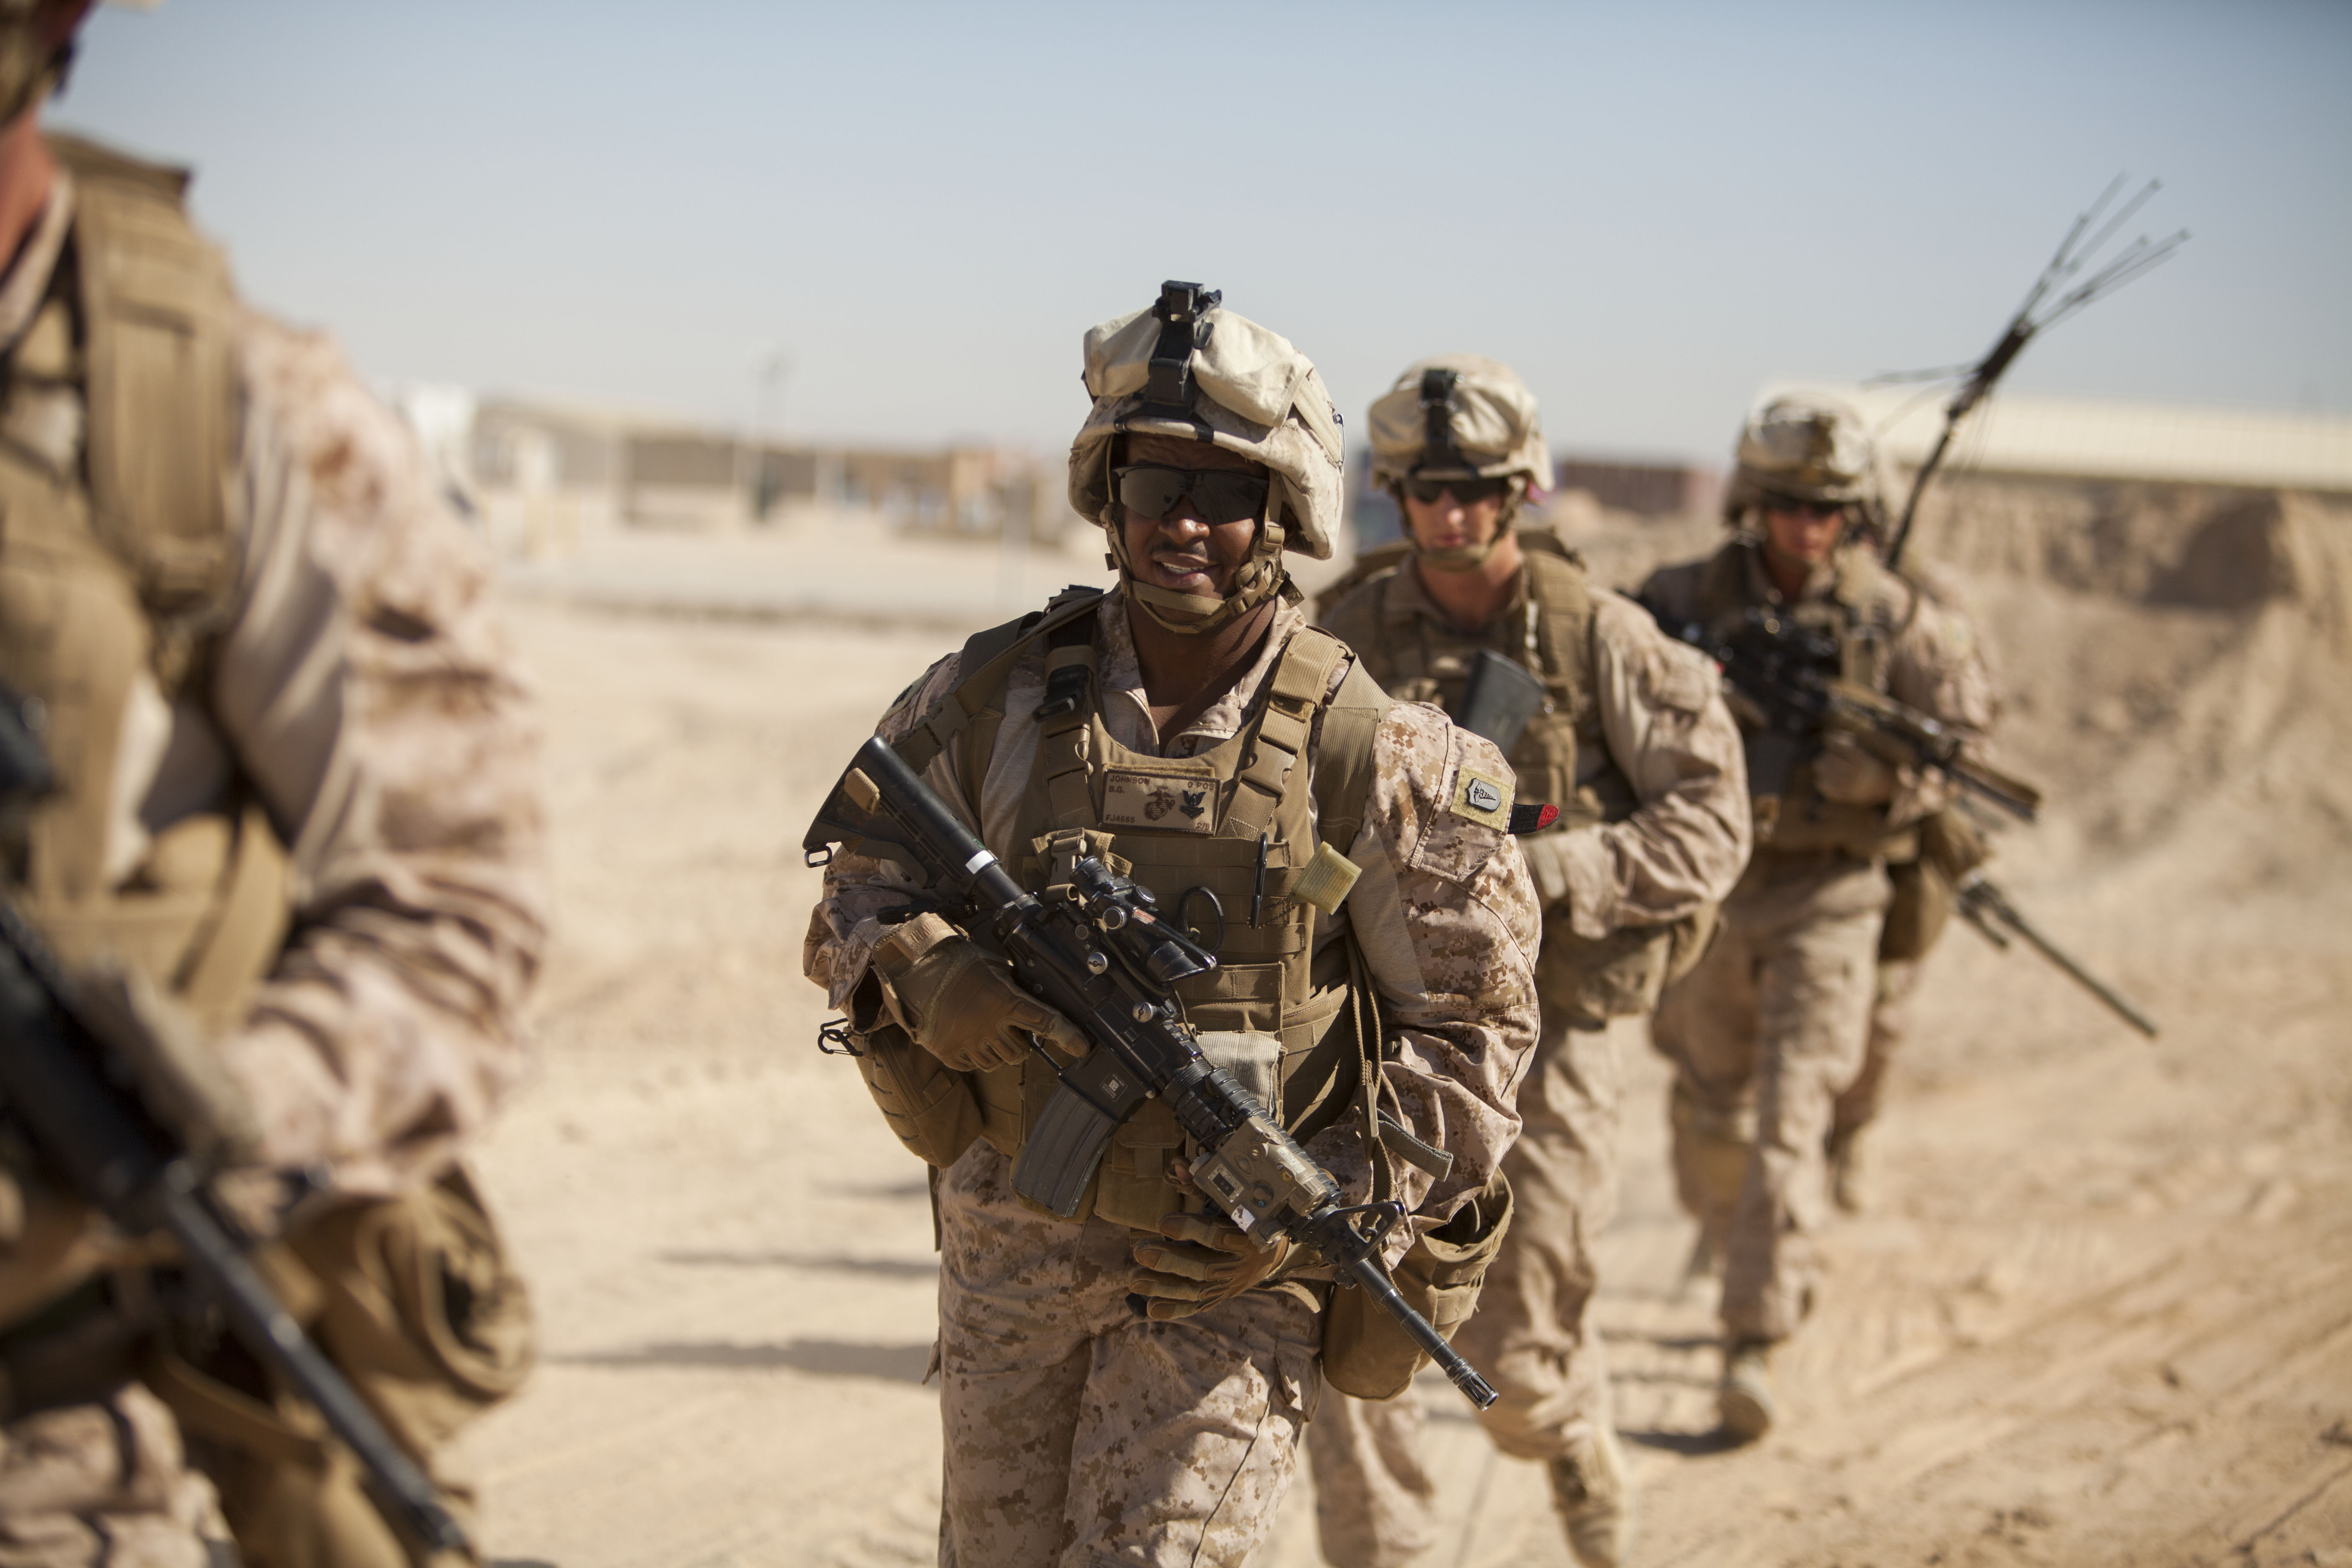 U.S._Navy_Hospital_Corpsman_2nd_Class_Branden_Johnson,_center,_assigned_to_the_Marine_Corps_Fox_Company,_2nd_Battalion,_8th_Marine_Regiment,_Regimental_Combat_Team_7,_participates_in_a_mission_rehearsal_at_Camp_130528-M-QZ858-096.jpg